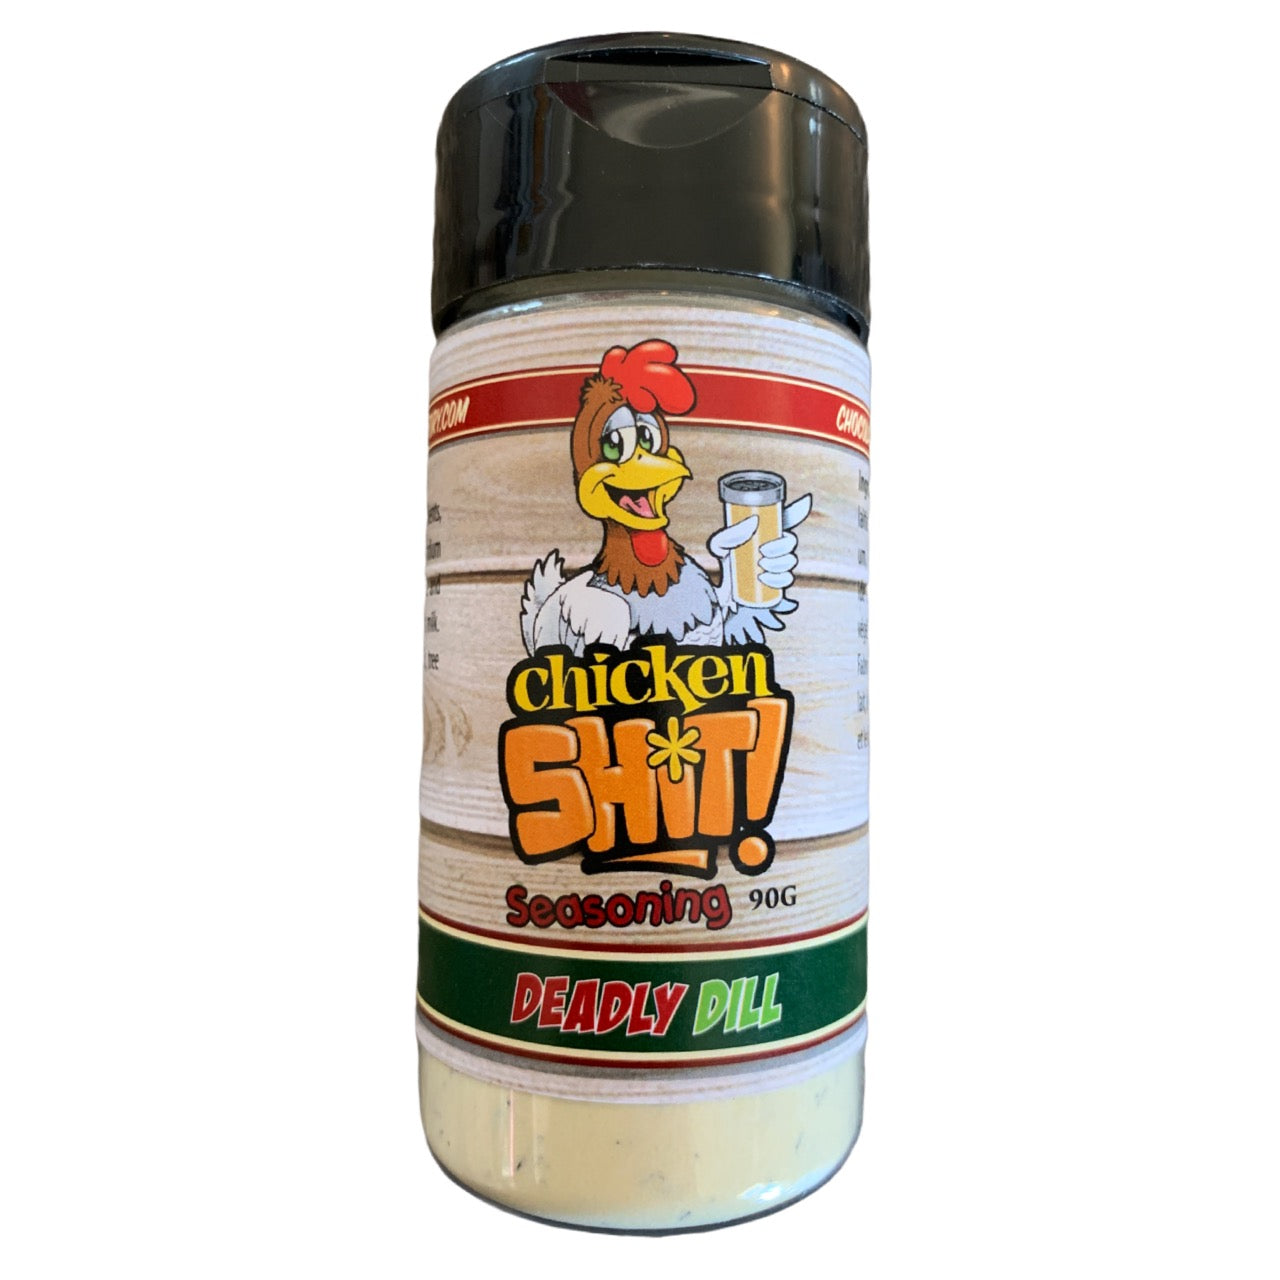 Chicken Shit Deadly Dill Pickle Seasoning